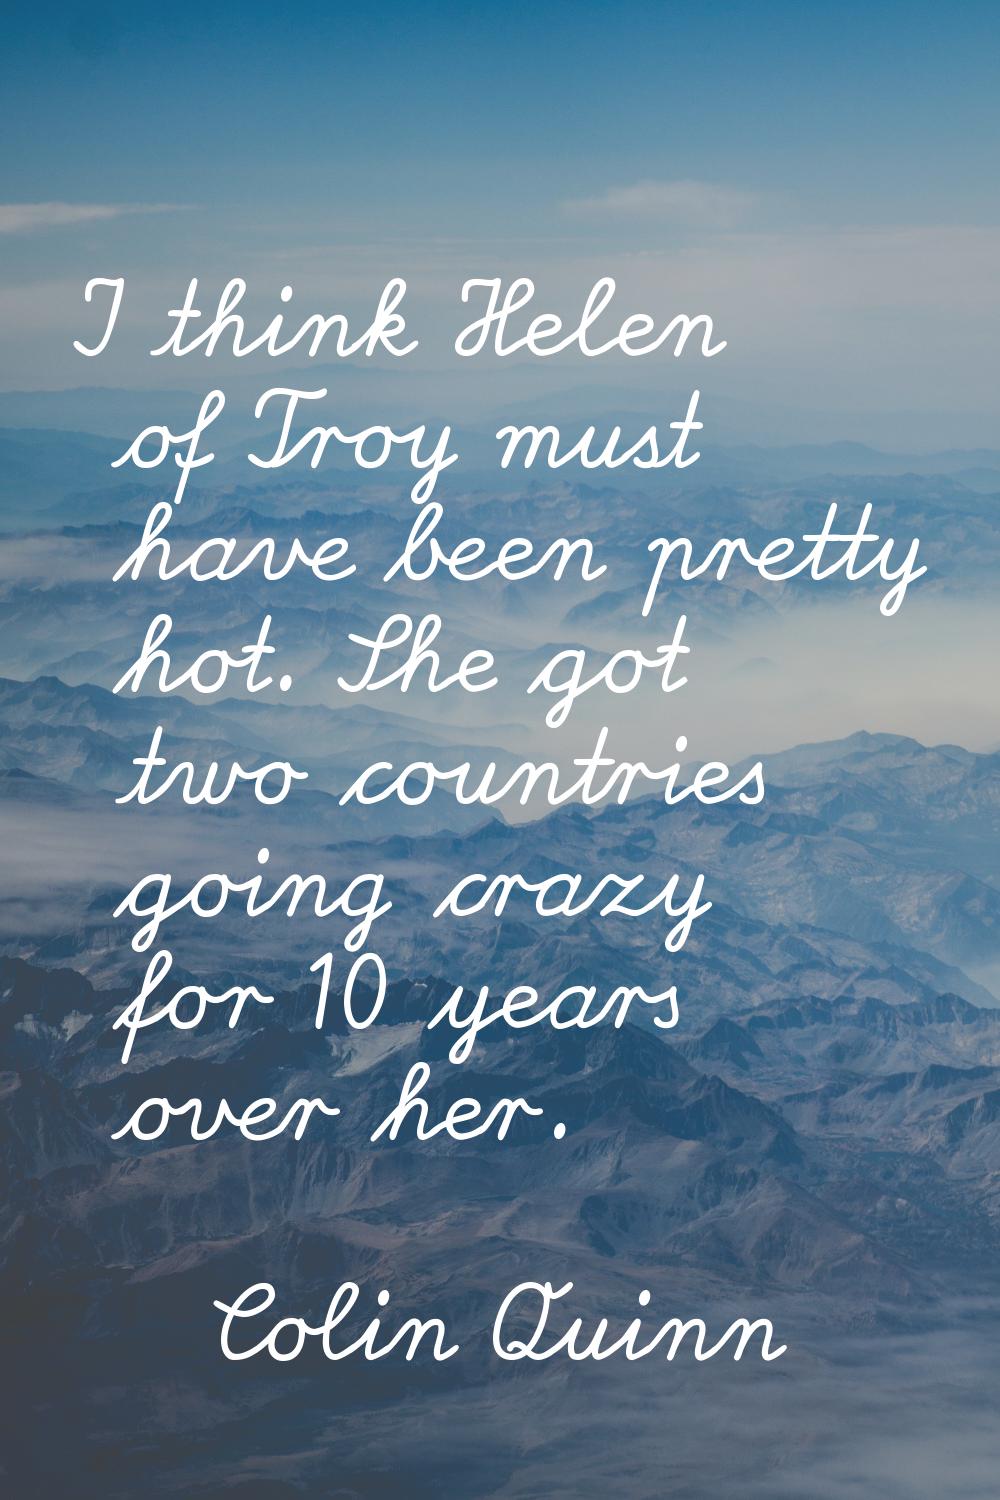 I think Helen of Troy must have been pretty hot. She got two countries going crazy for 10 years ove